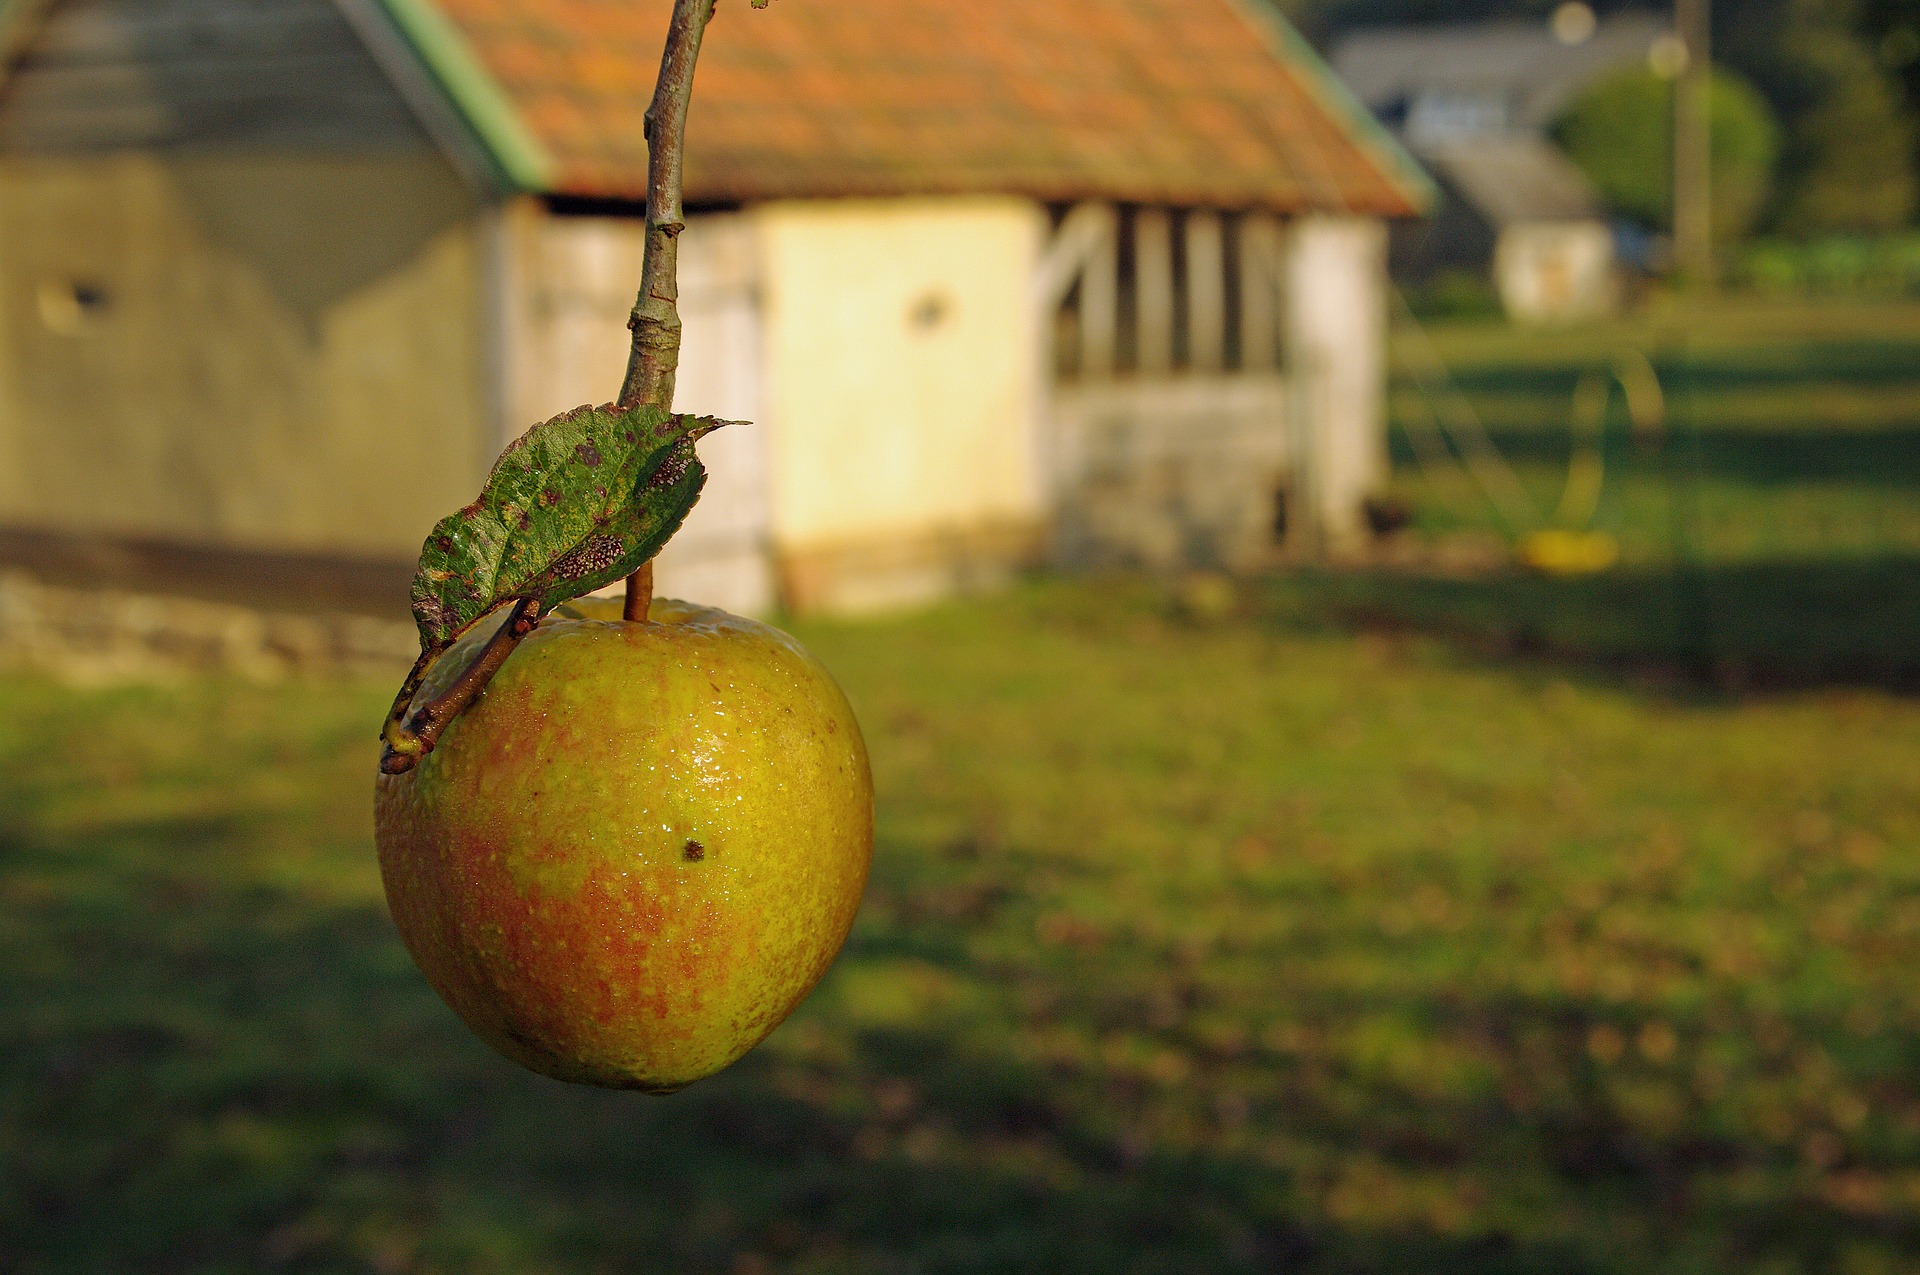 The Apple Culture of Normandy